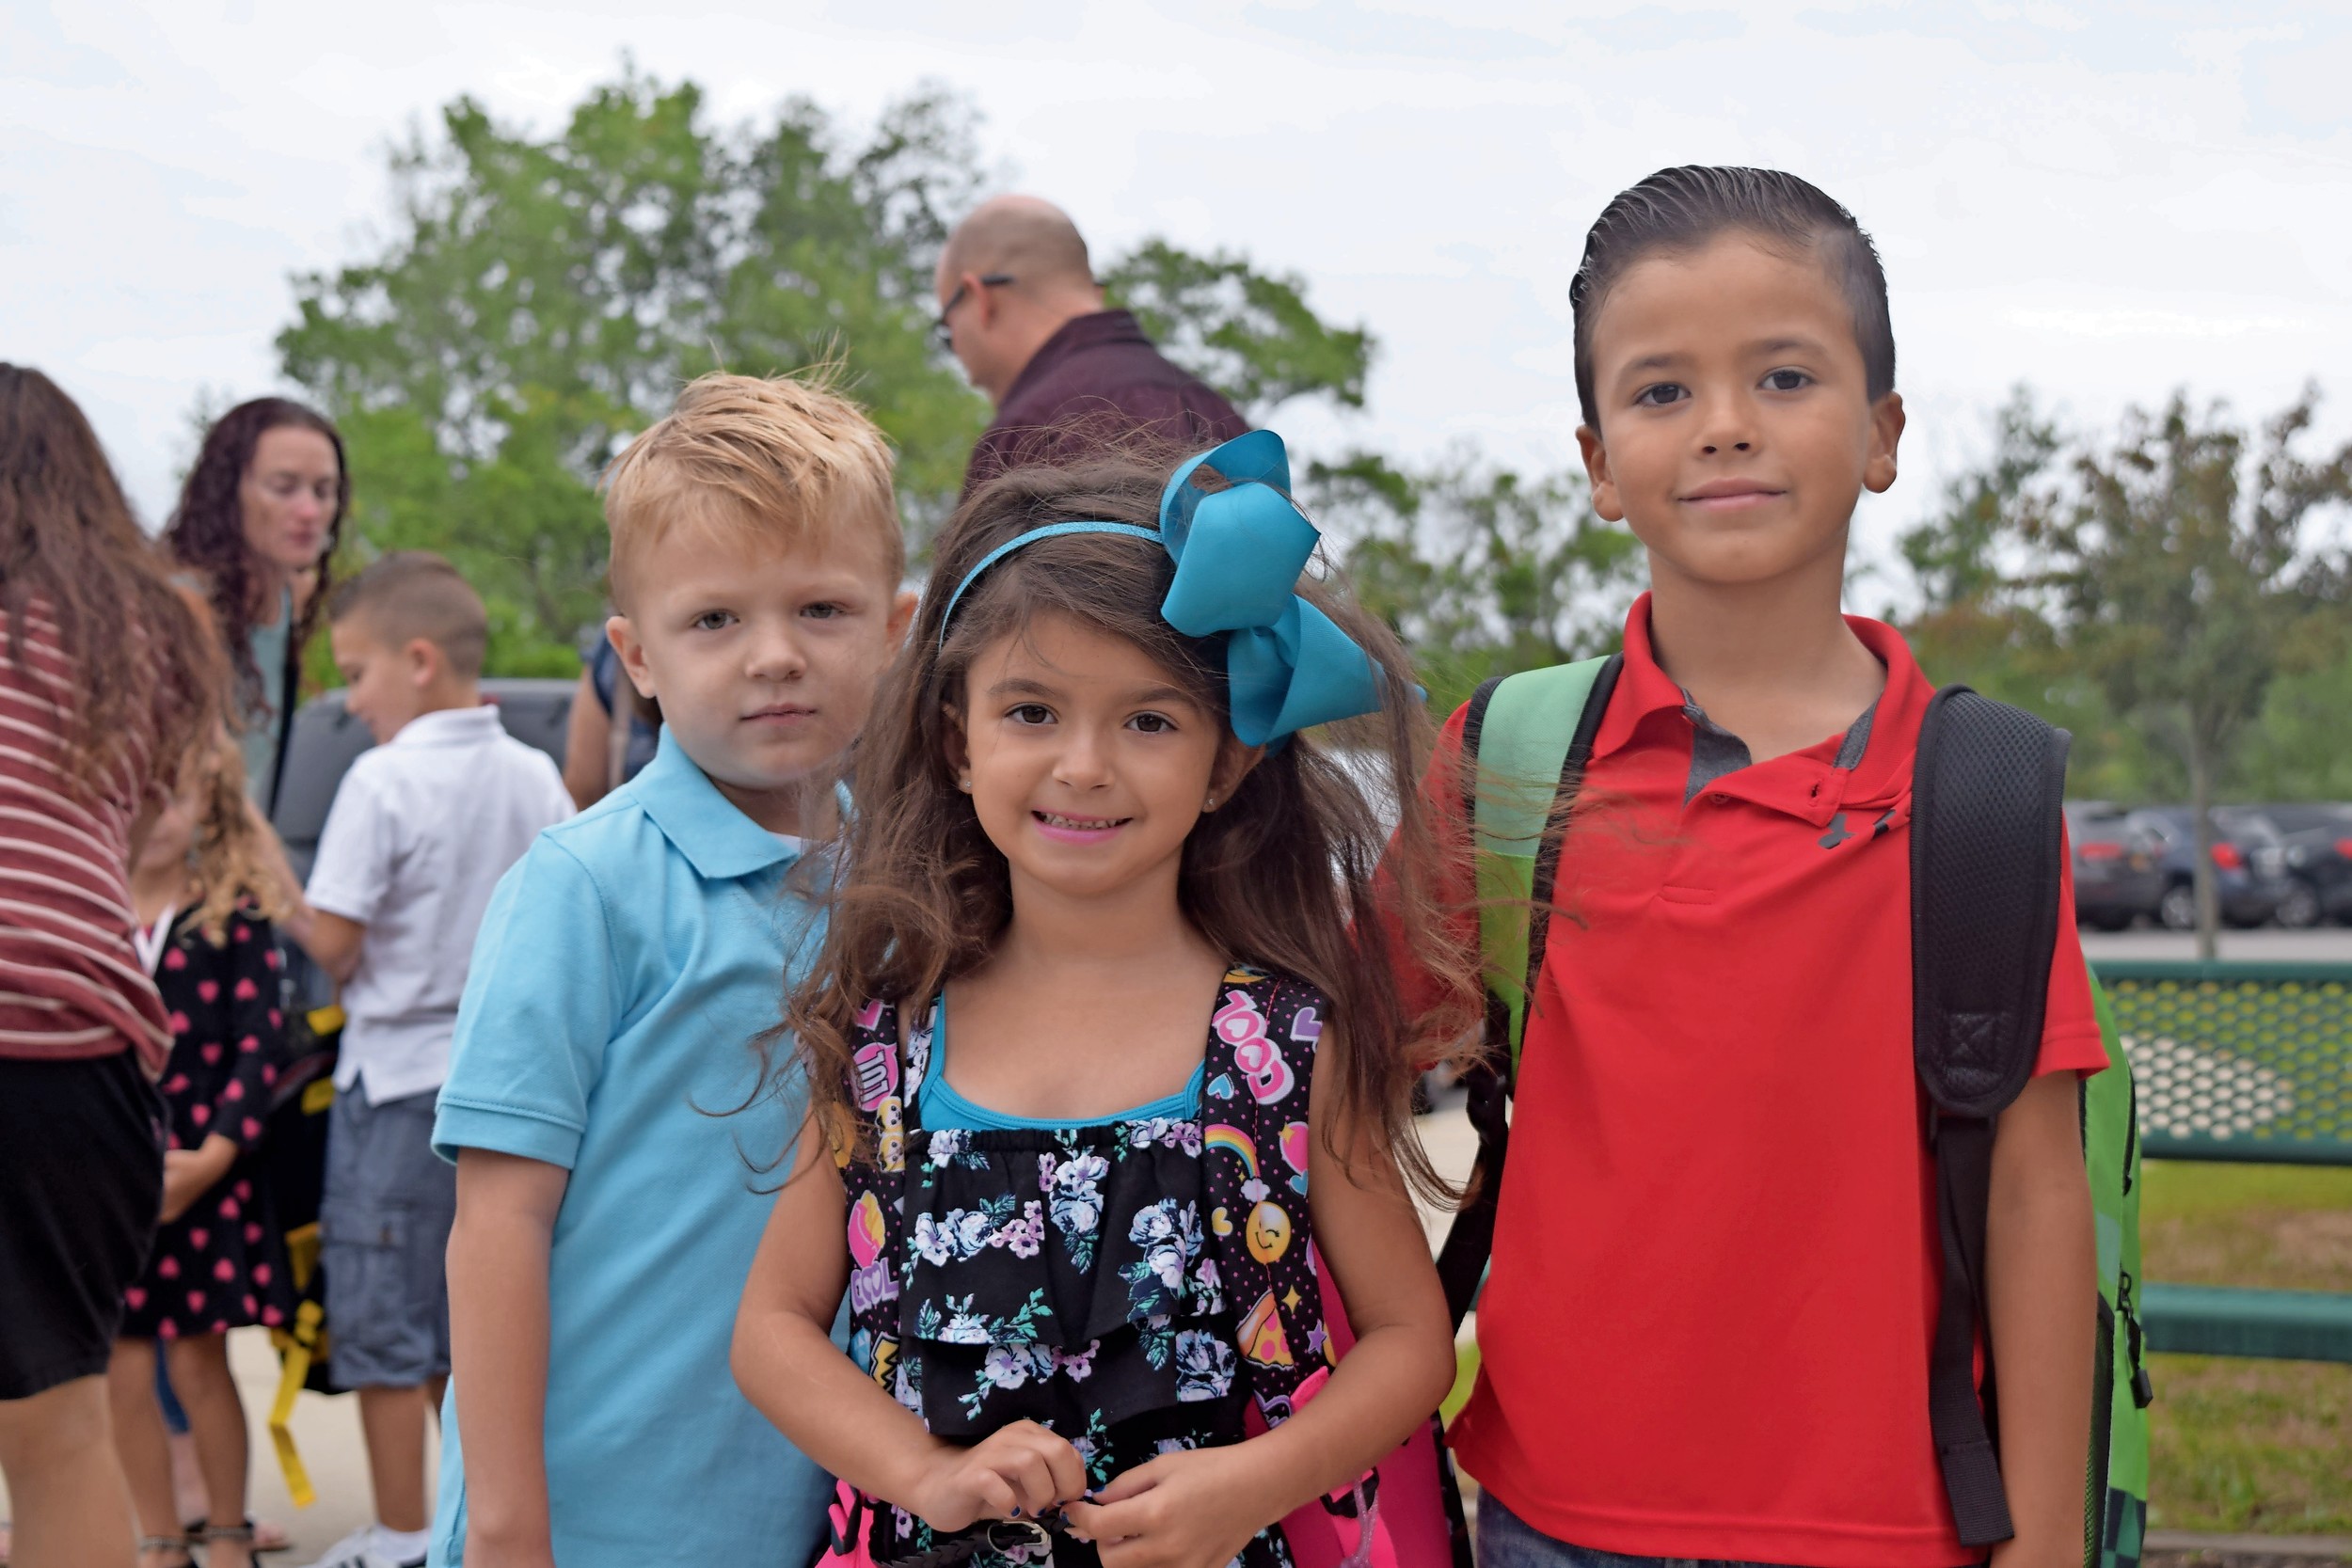 Lucas Meisenholder, 6, far left, Alessandra Saurman, 7, and Joe Vincent, 7, started a new school year at Seaford Harbor Elementary School this week. They are pictured on the first day of classes last year.